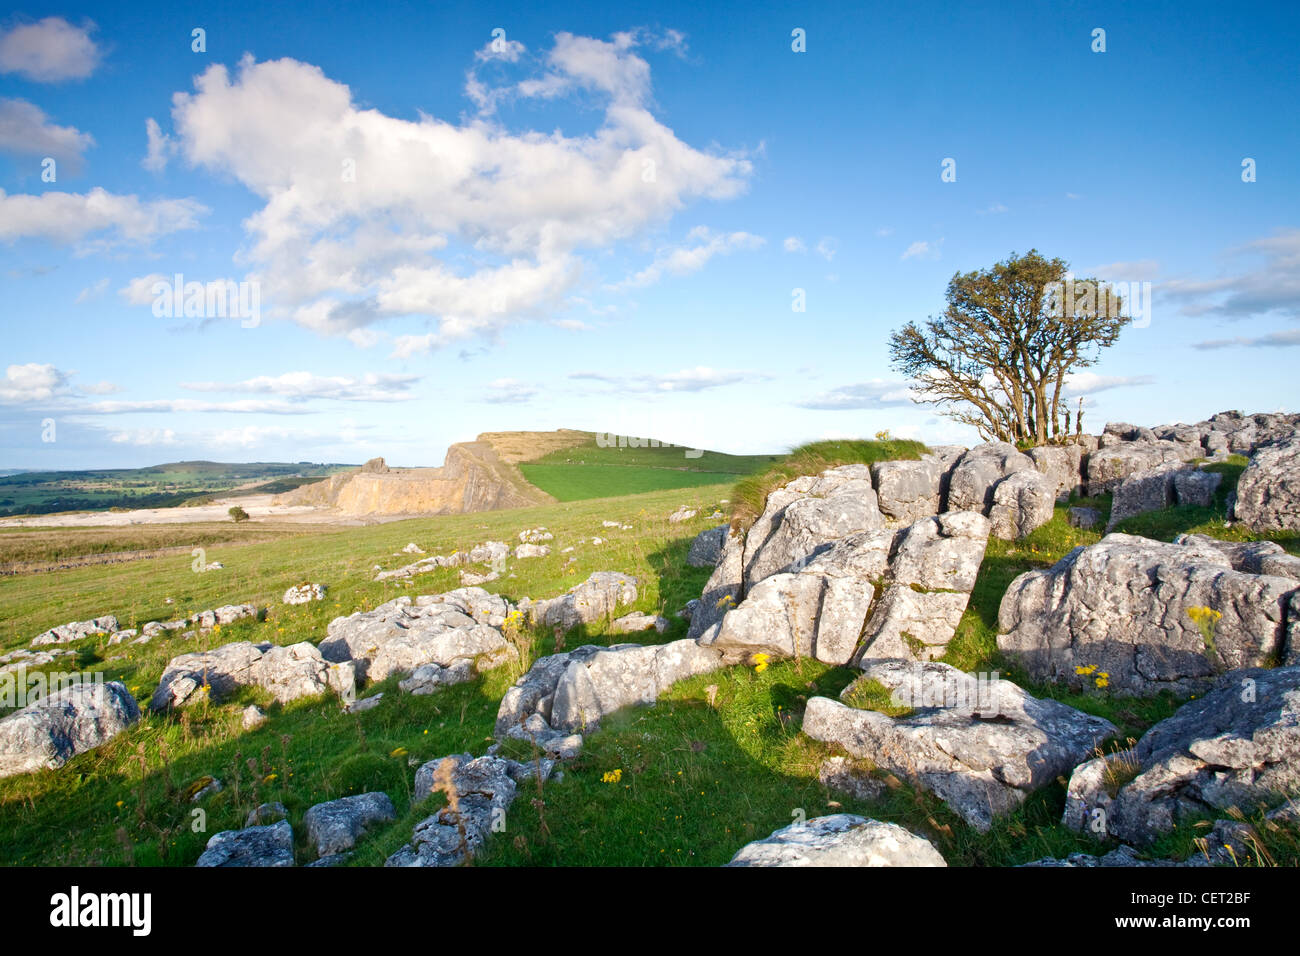 Limestone paving and a tree in the White Peak area of the Peak District National Park. Stock Photo